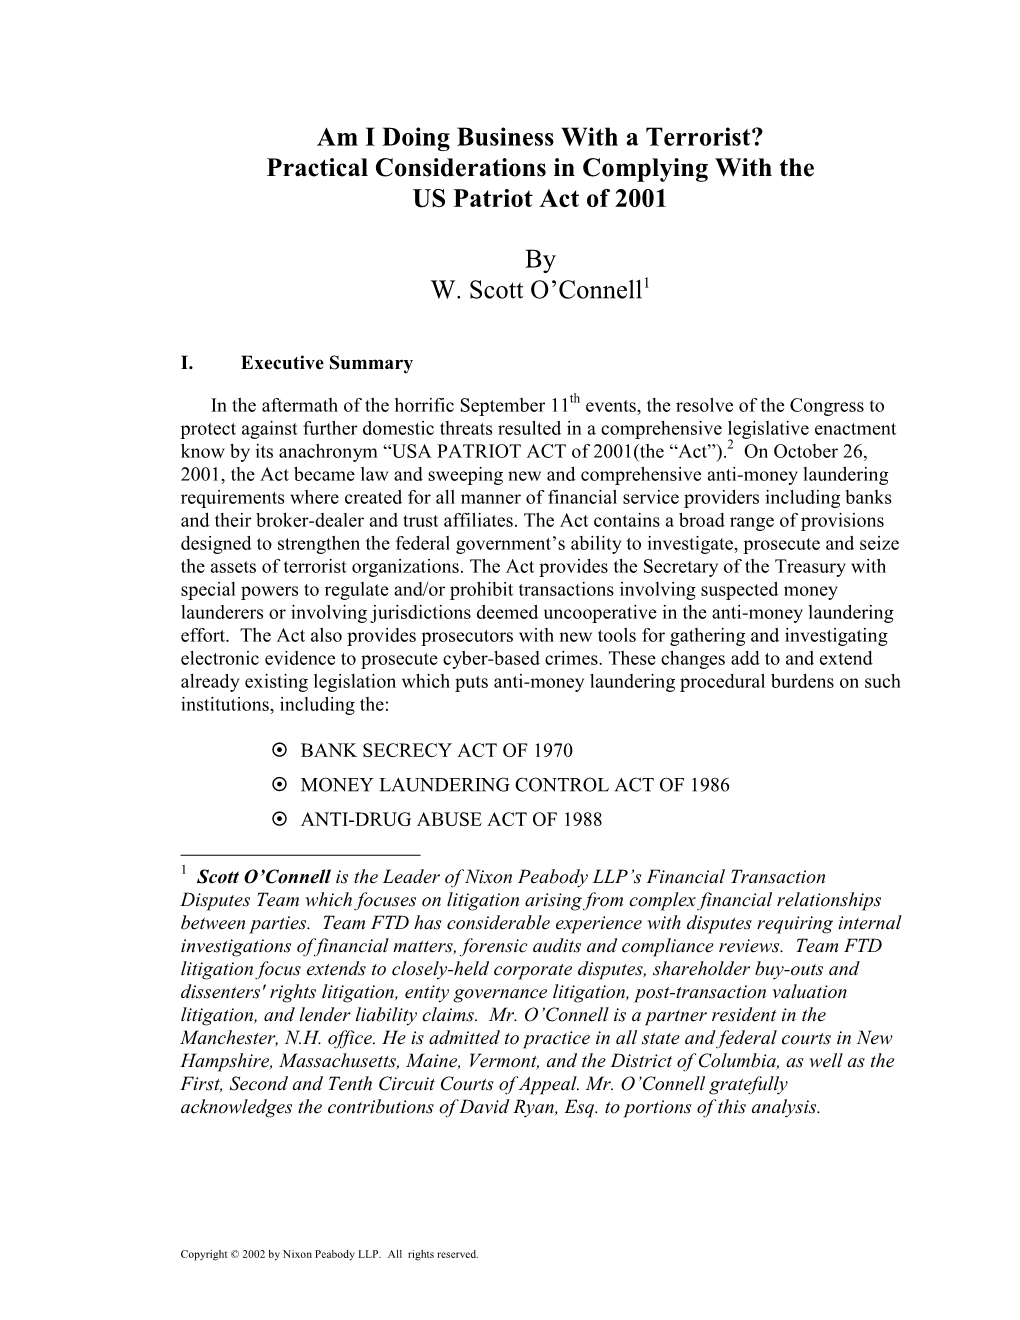 Practical Considerations in Complying with the US Patriot Act of 2001 By